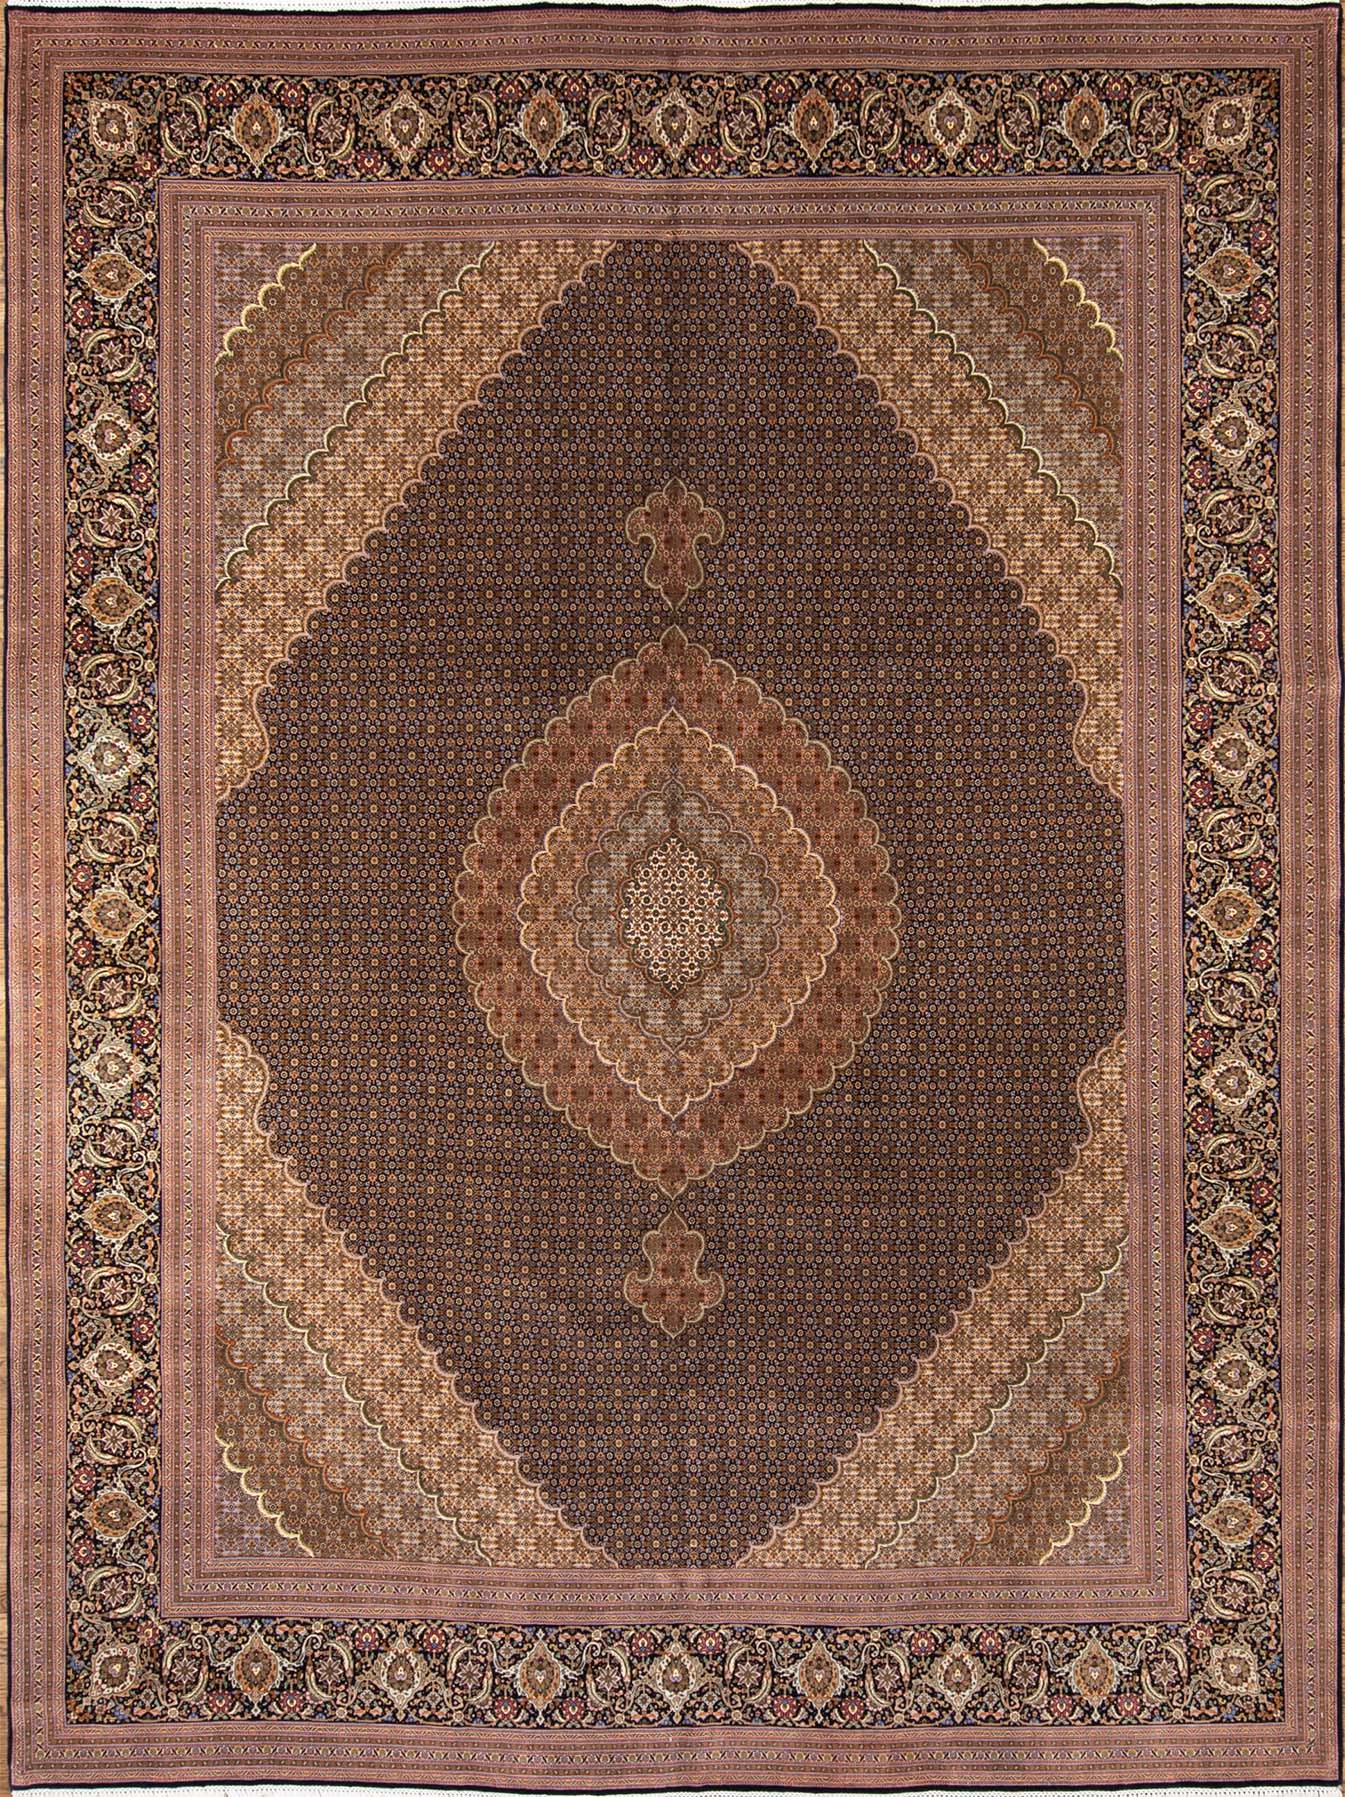 Old Traditional Rug, Handmade Persian Tabriz rug with black and brown colors. Size 10x13.2